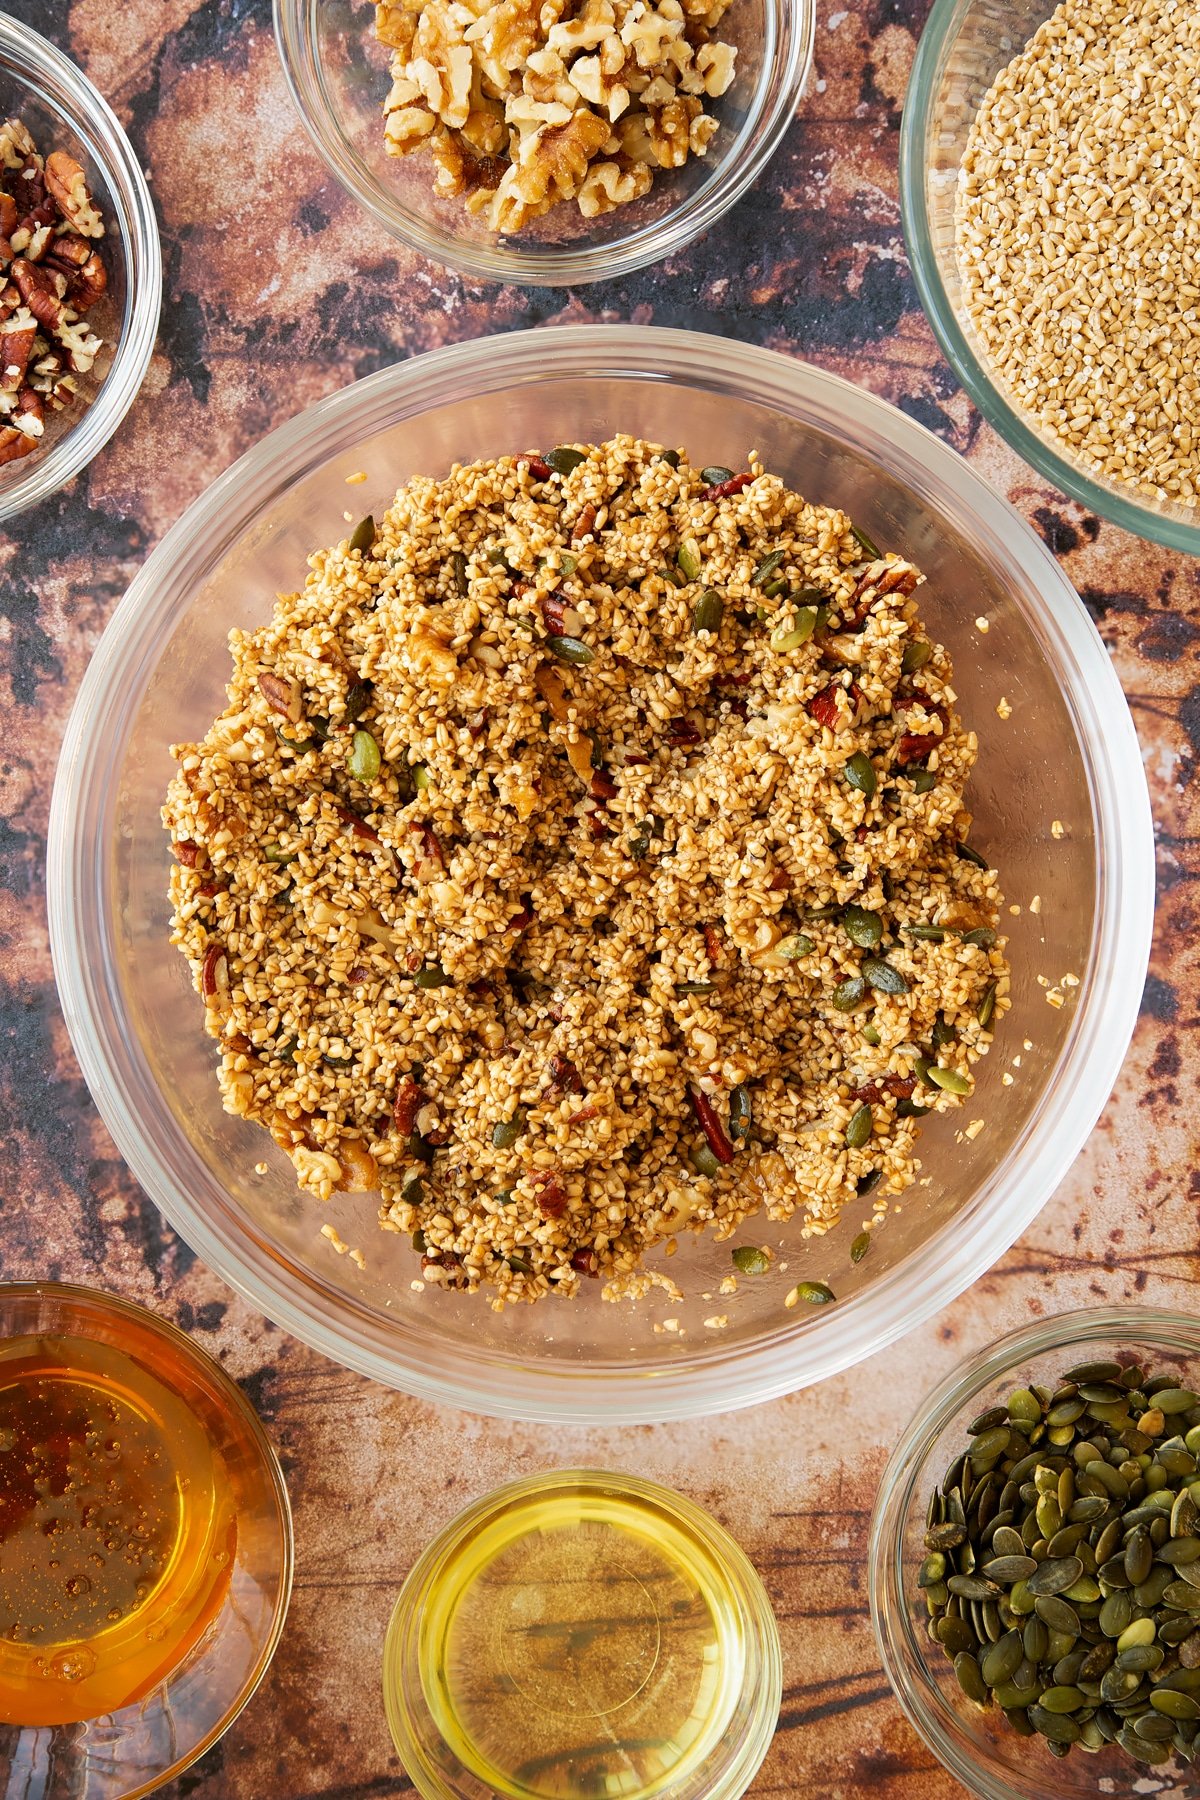 steel cut oats, pumpkin seeds, pecans and walnuts coated in honey and oil in a large clear bowl